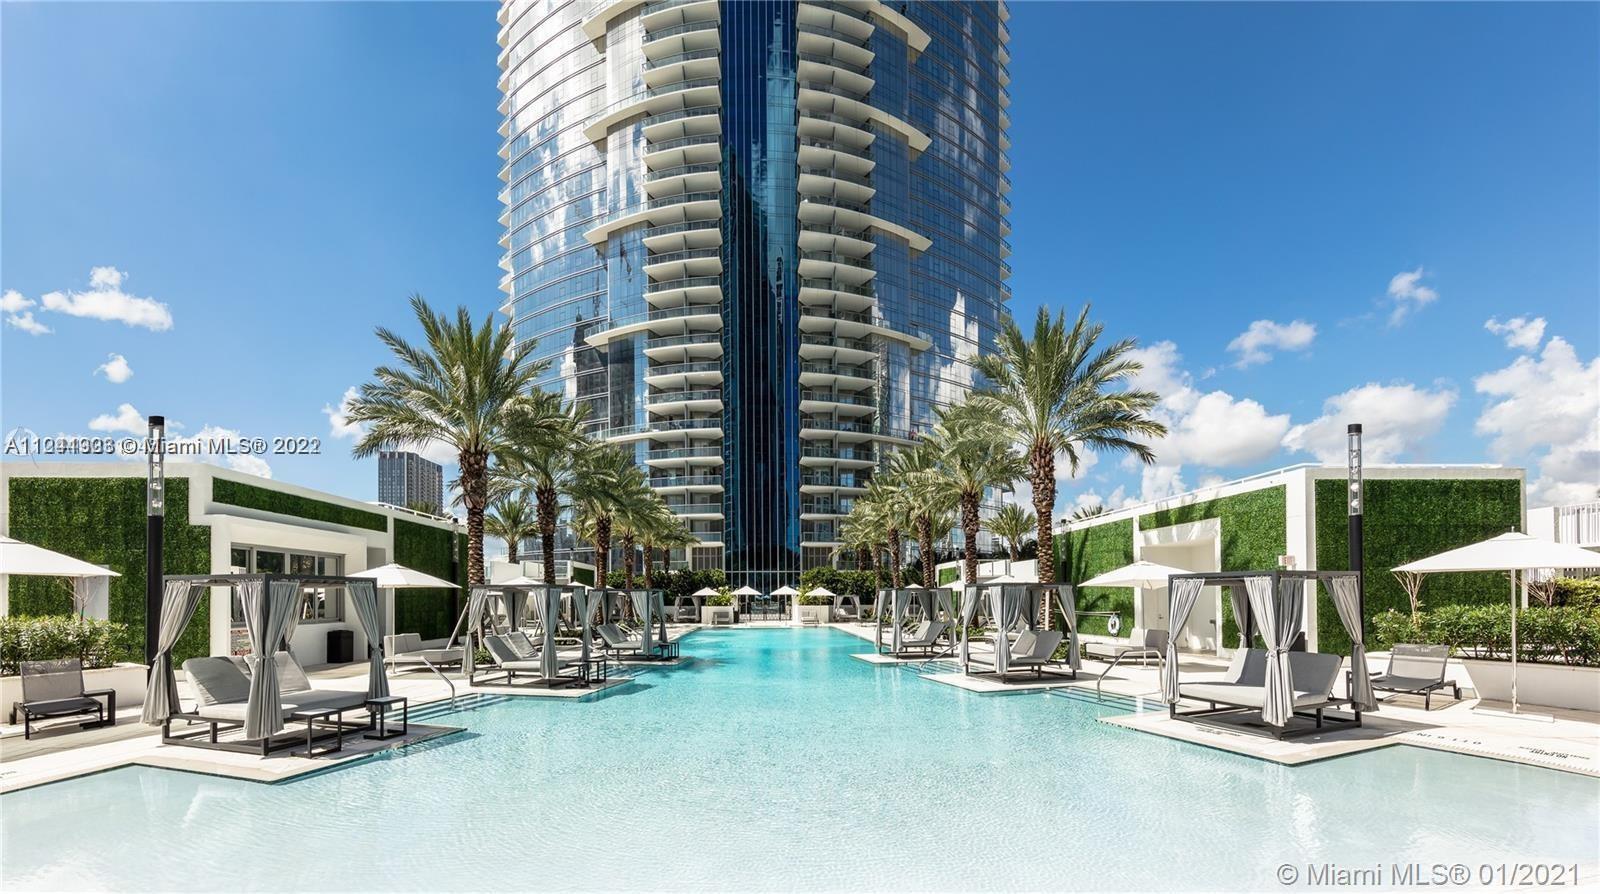 BEAUTIFUL 1bed/1.5bath + den at Paramount Miami World Center. Featuring walk-in closet, high end Sub